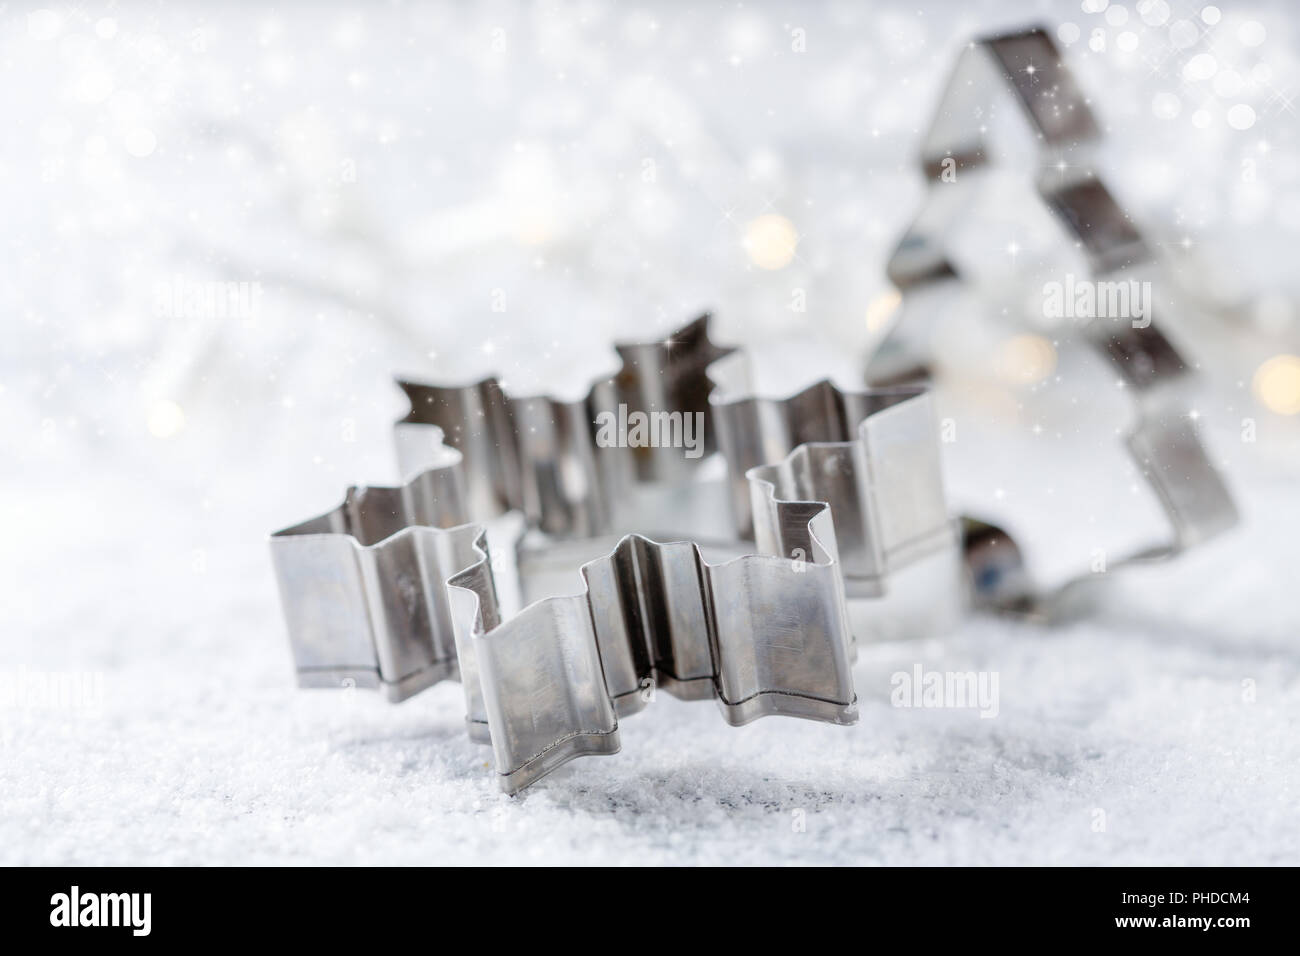 Metal cutters for Christmas cookies. Stock Photo